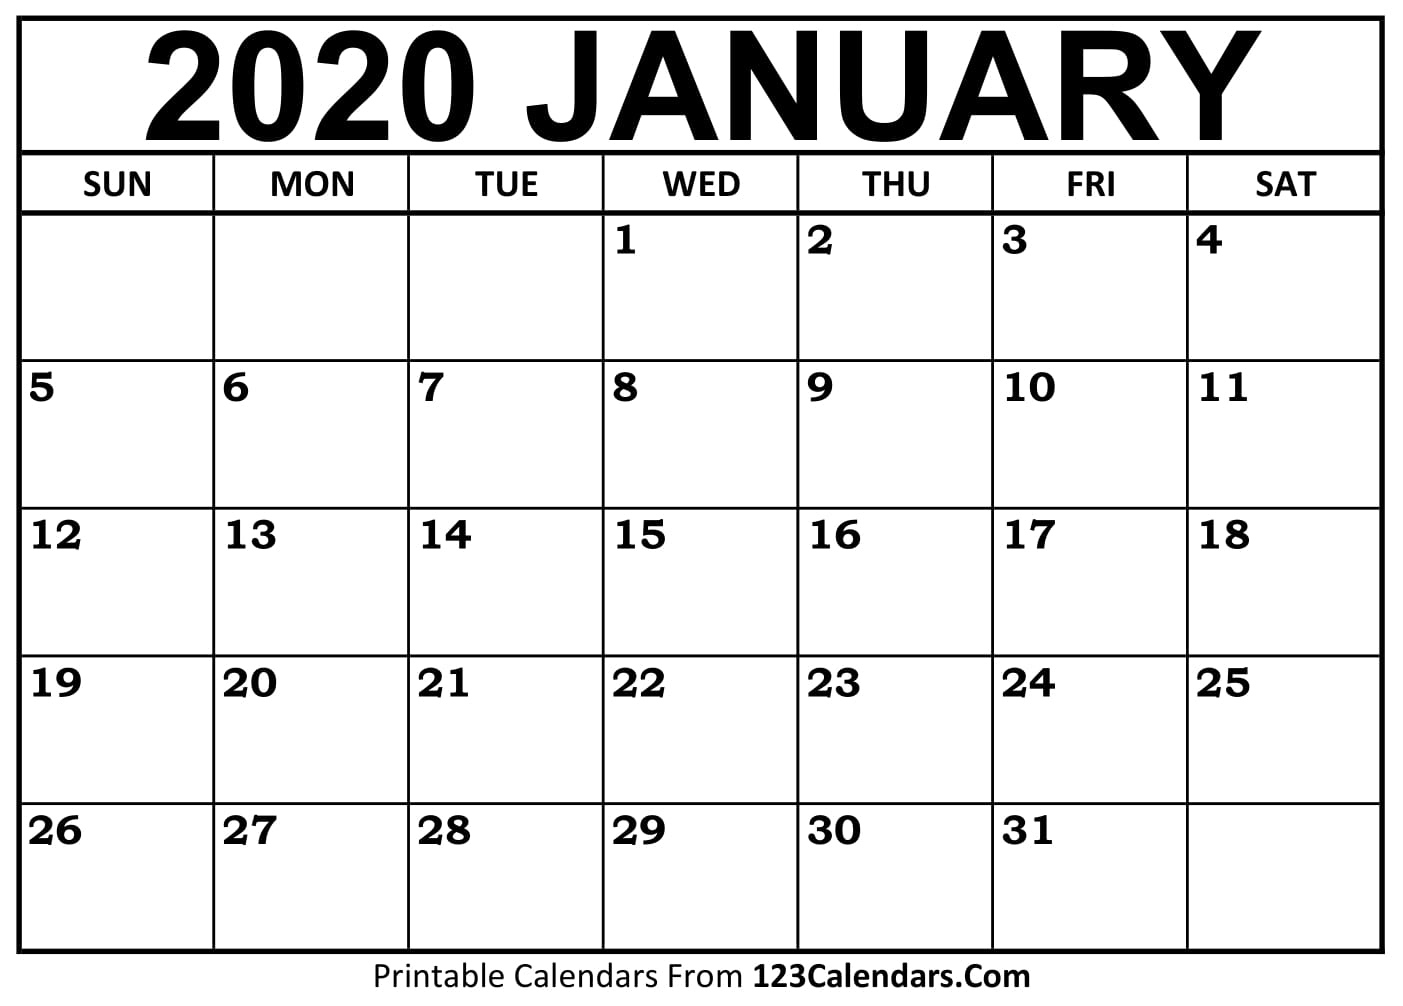 Free Printable Calendar | 123Calendars Monthly Calendar You Can Type On And Print